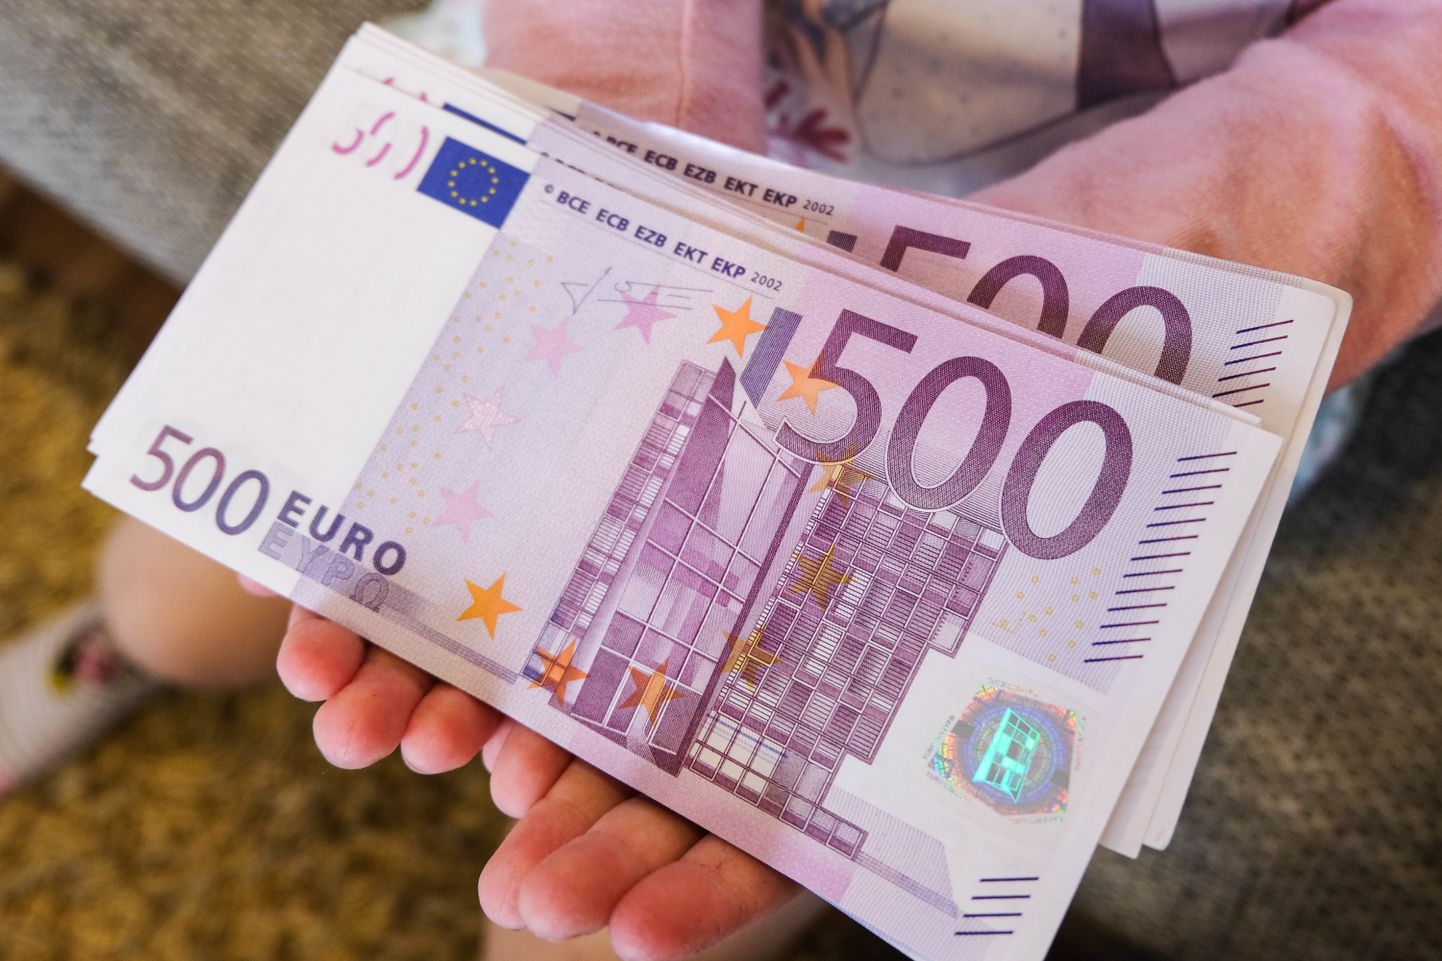 Today, pensioners have to pay income tax for all income over €500 a month.